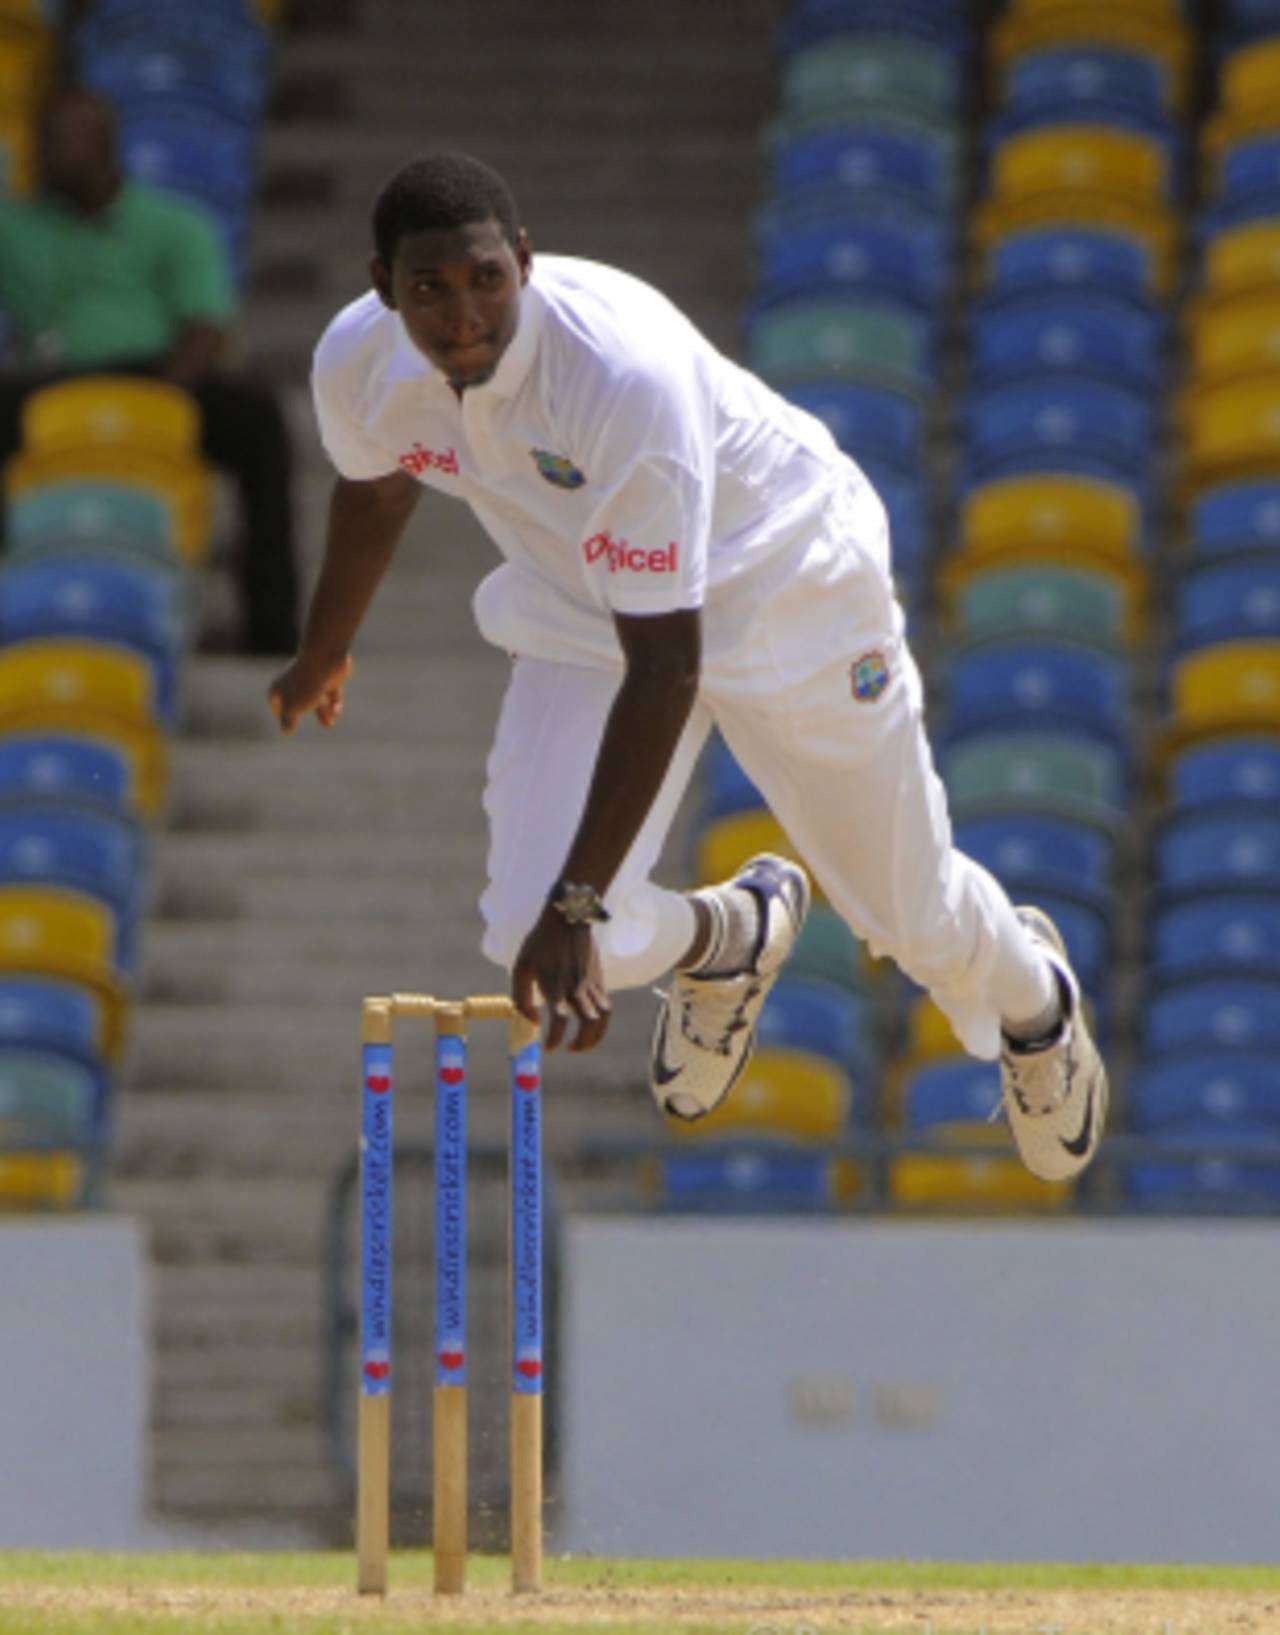 Hendy Springer, West Indies A coach: "[Delorn Johnson] bowled with pace and also got the ball to swing; it was a significant stepping stone in his development."&nbsp;&nbsp;&bull;&nbsp;&nbsp;West Indies Cricket Board